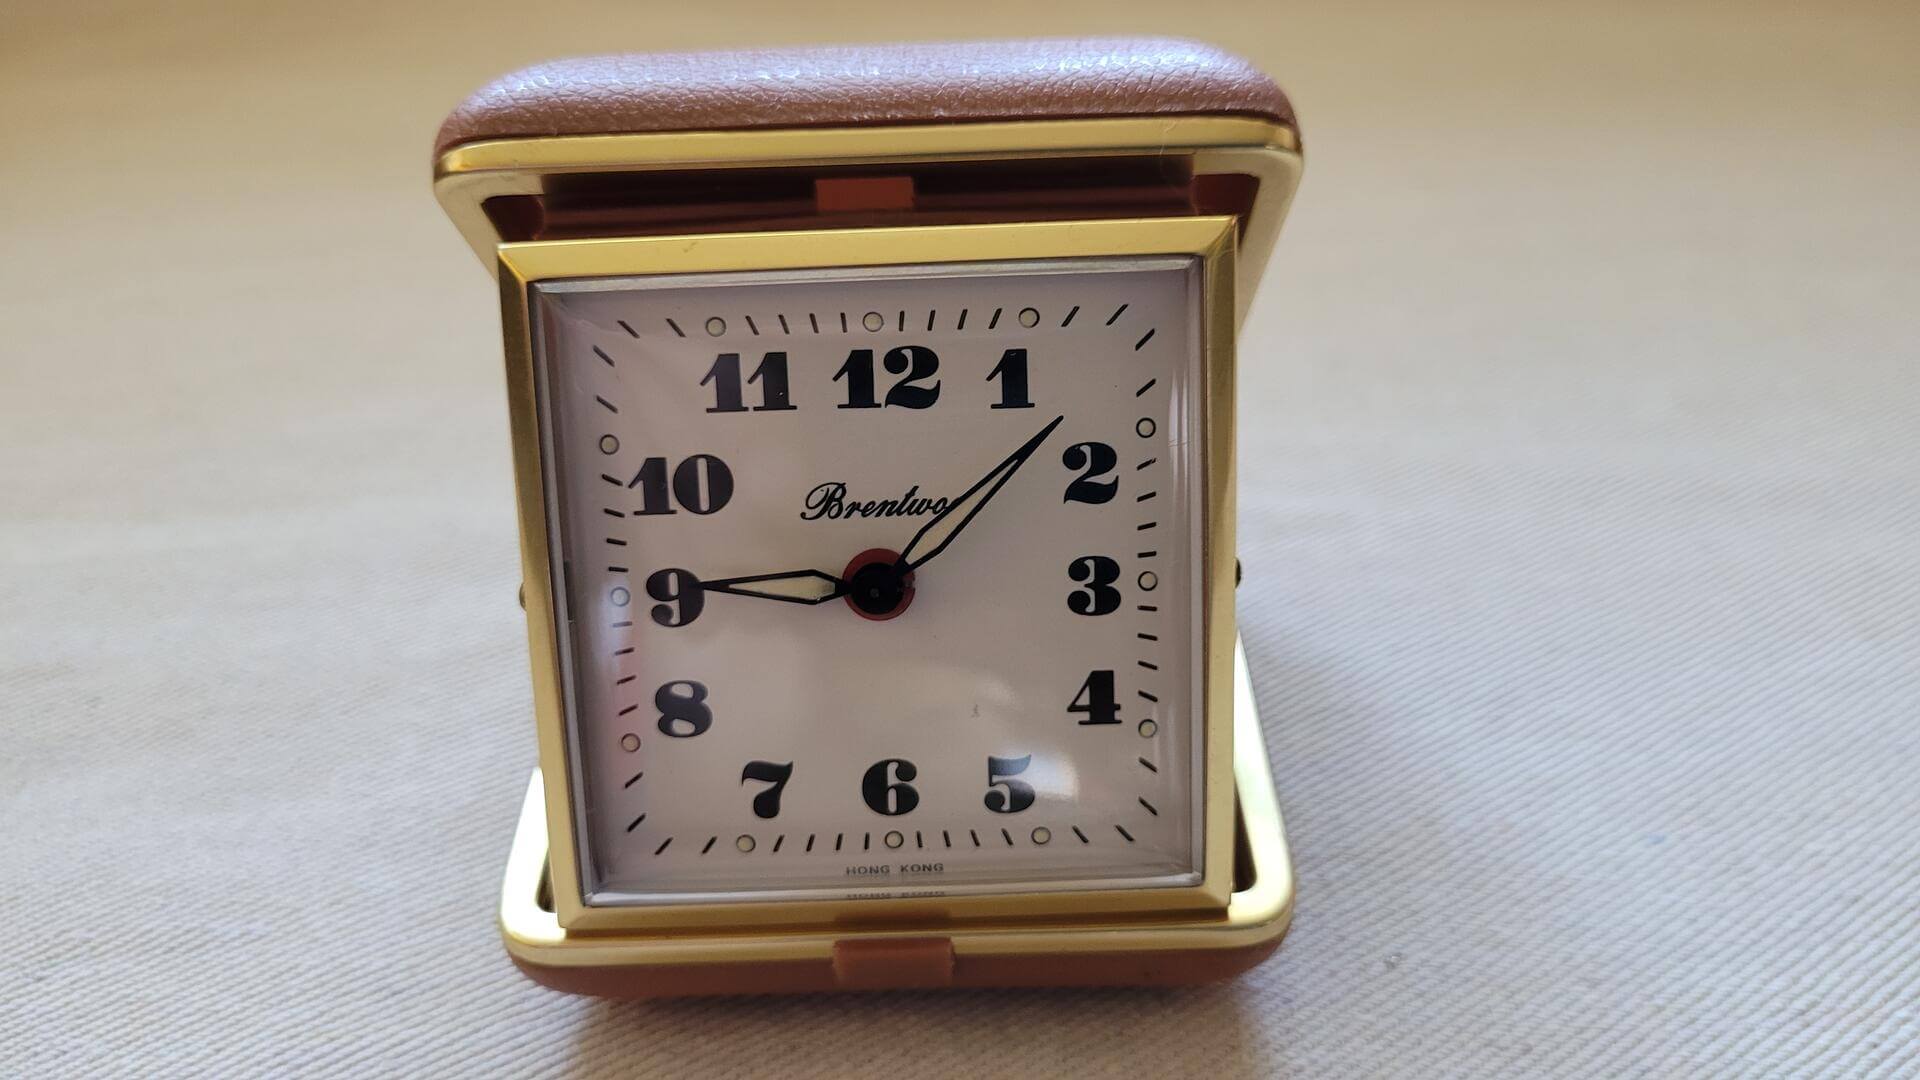 Retro Brentwood Wind-up Travel Bedside Alarm Clock with Hard Case and Metal Case and Winding Key - Vintage 1960s Made in Hong Kong Collectible Clocks